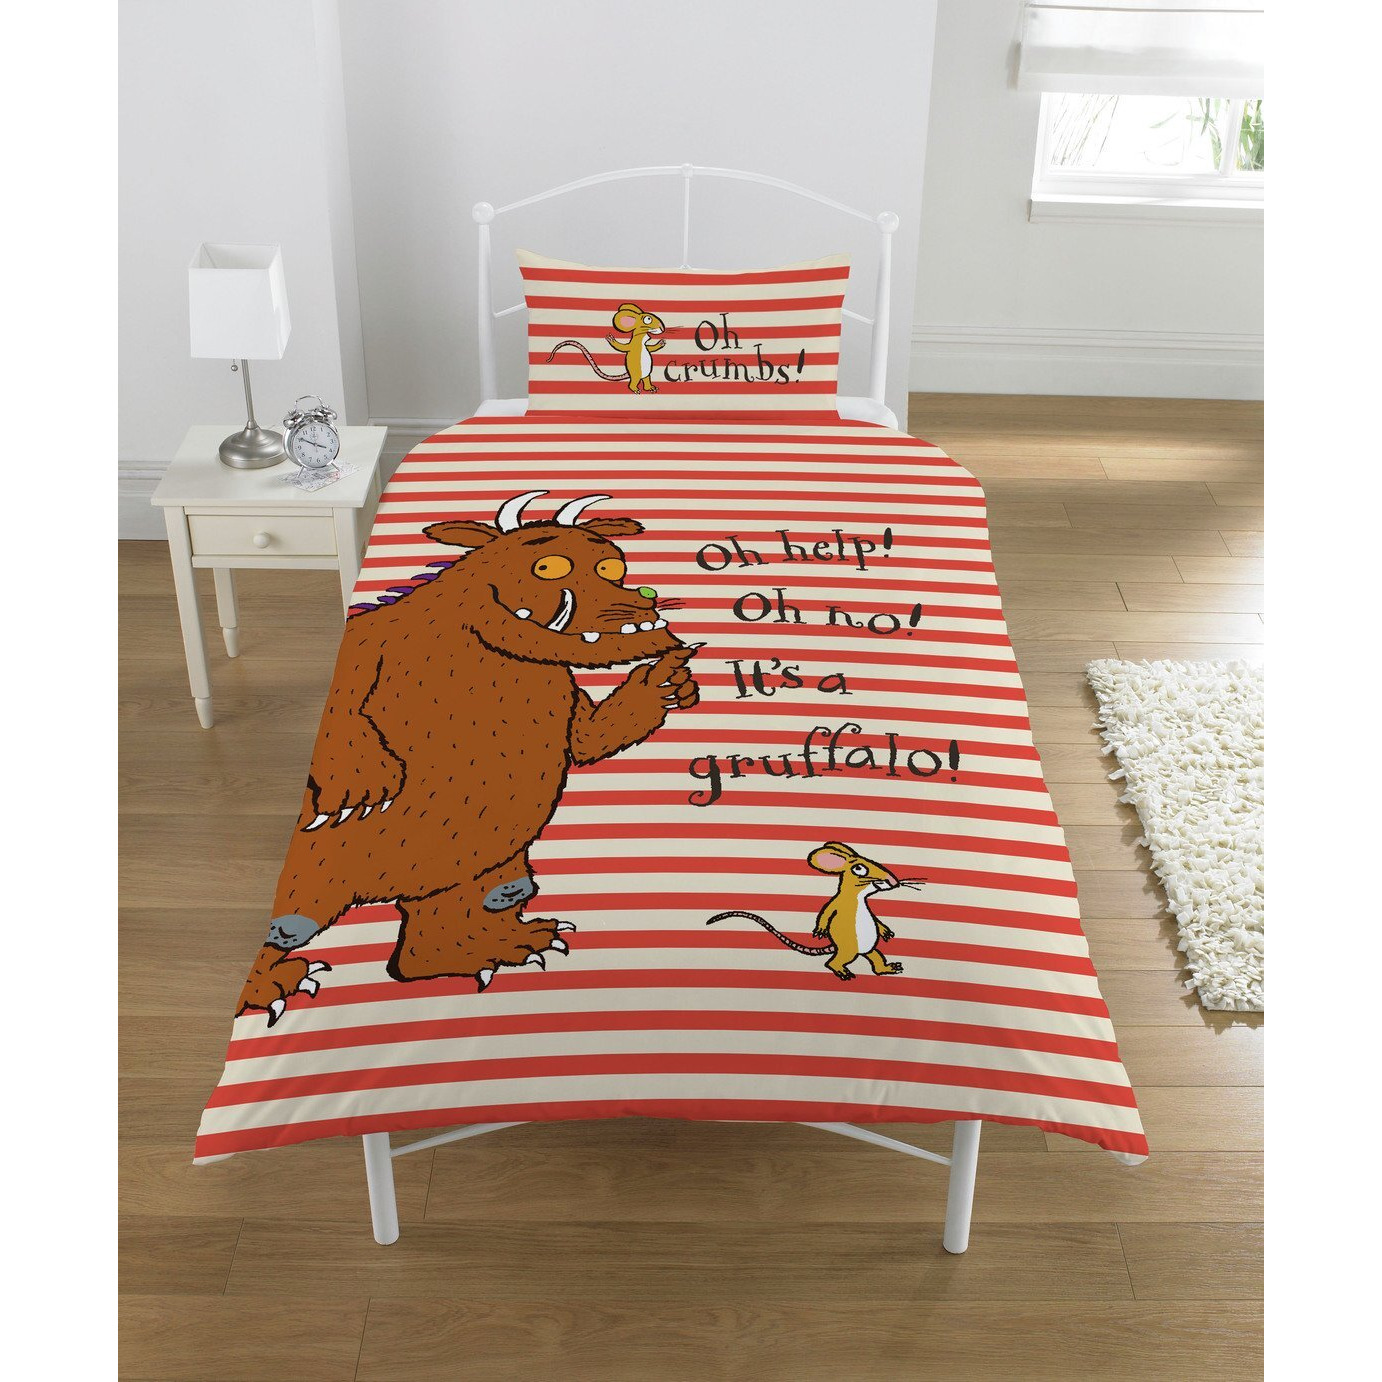 The Gruffalo and Mouse Red & White Kids Bedding Set - Single - image 1